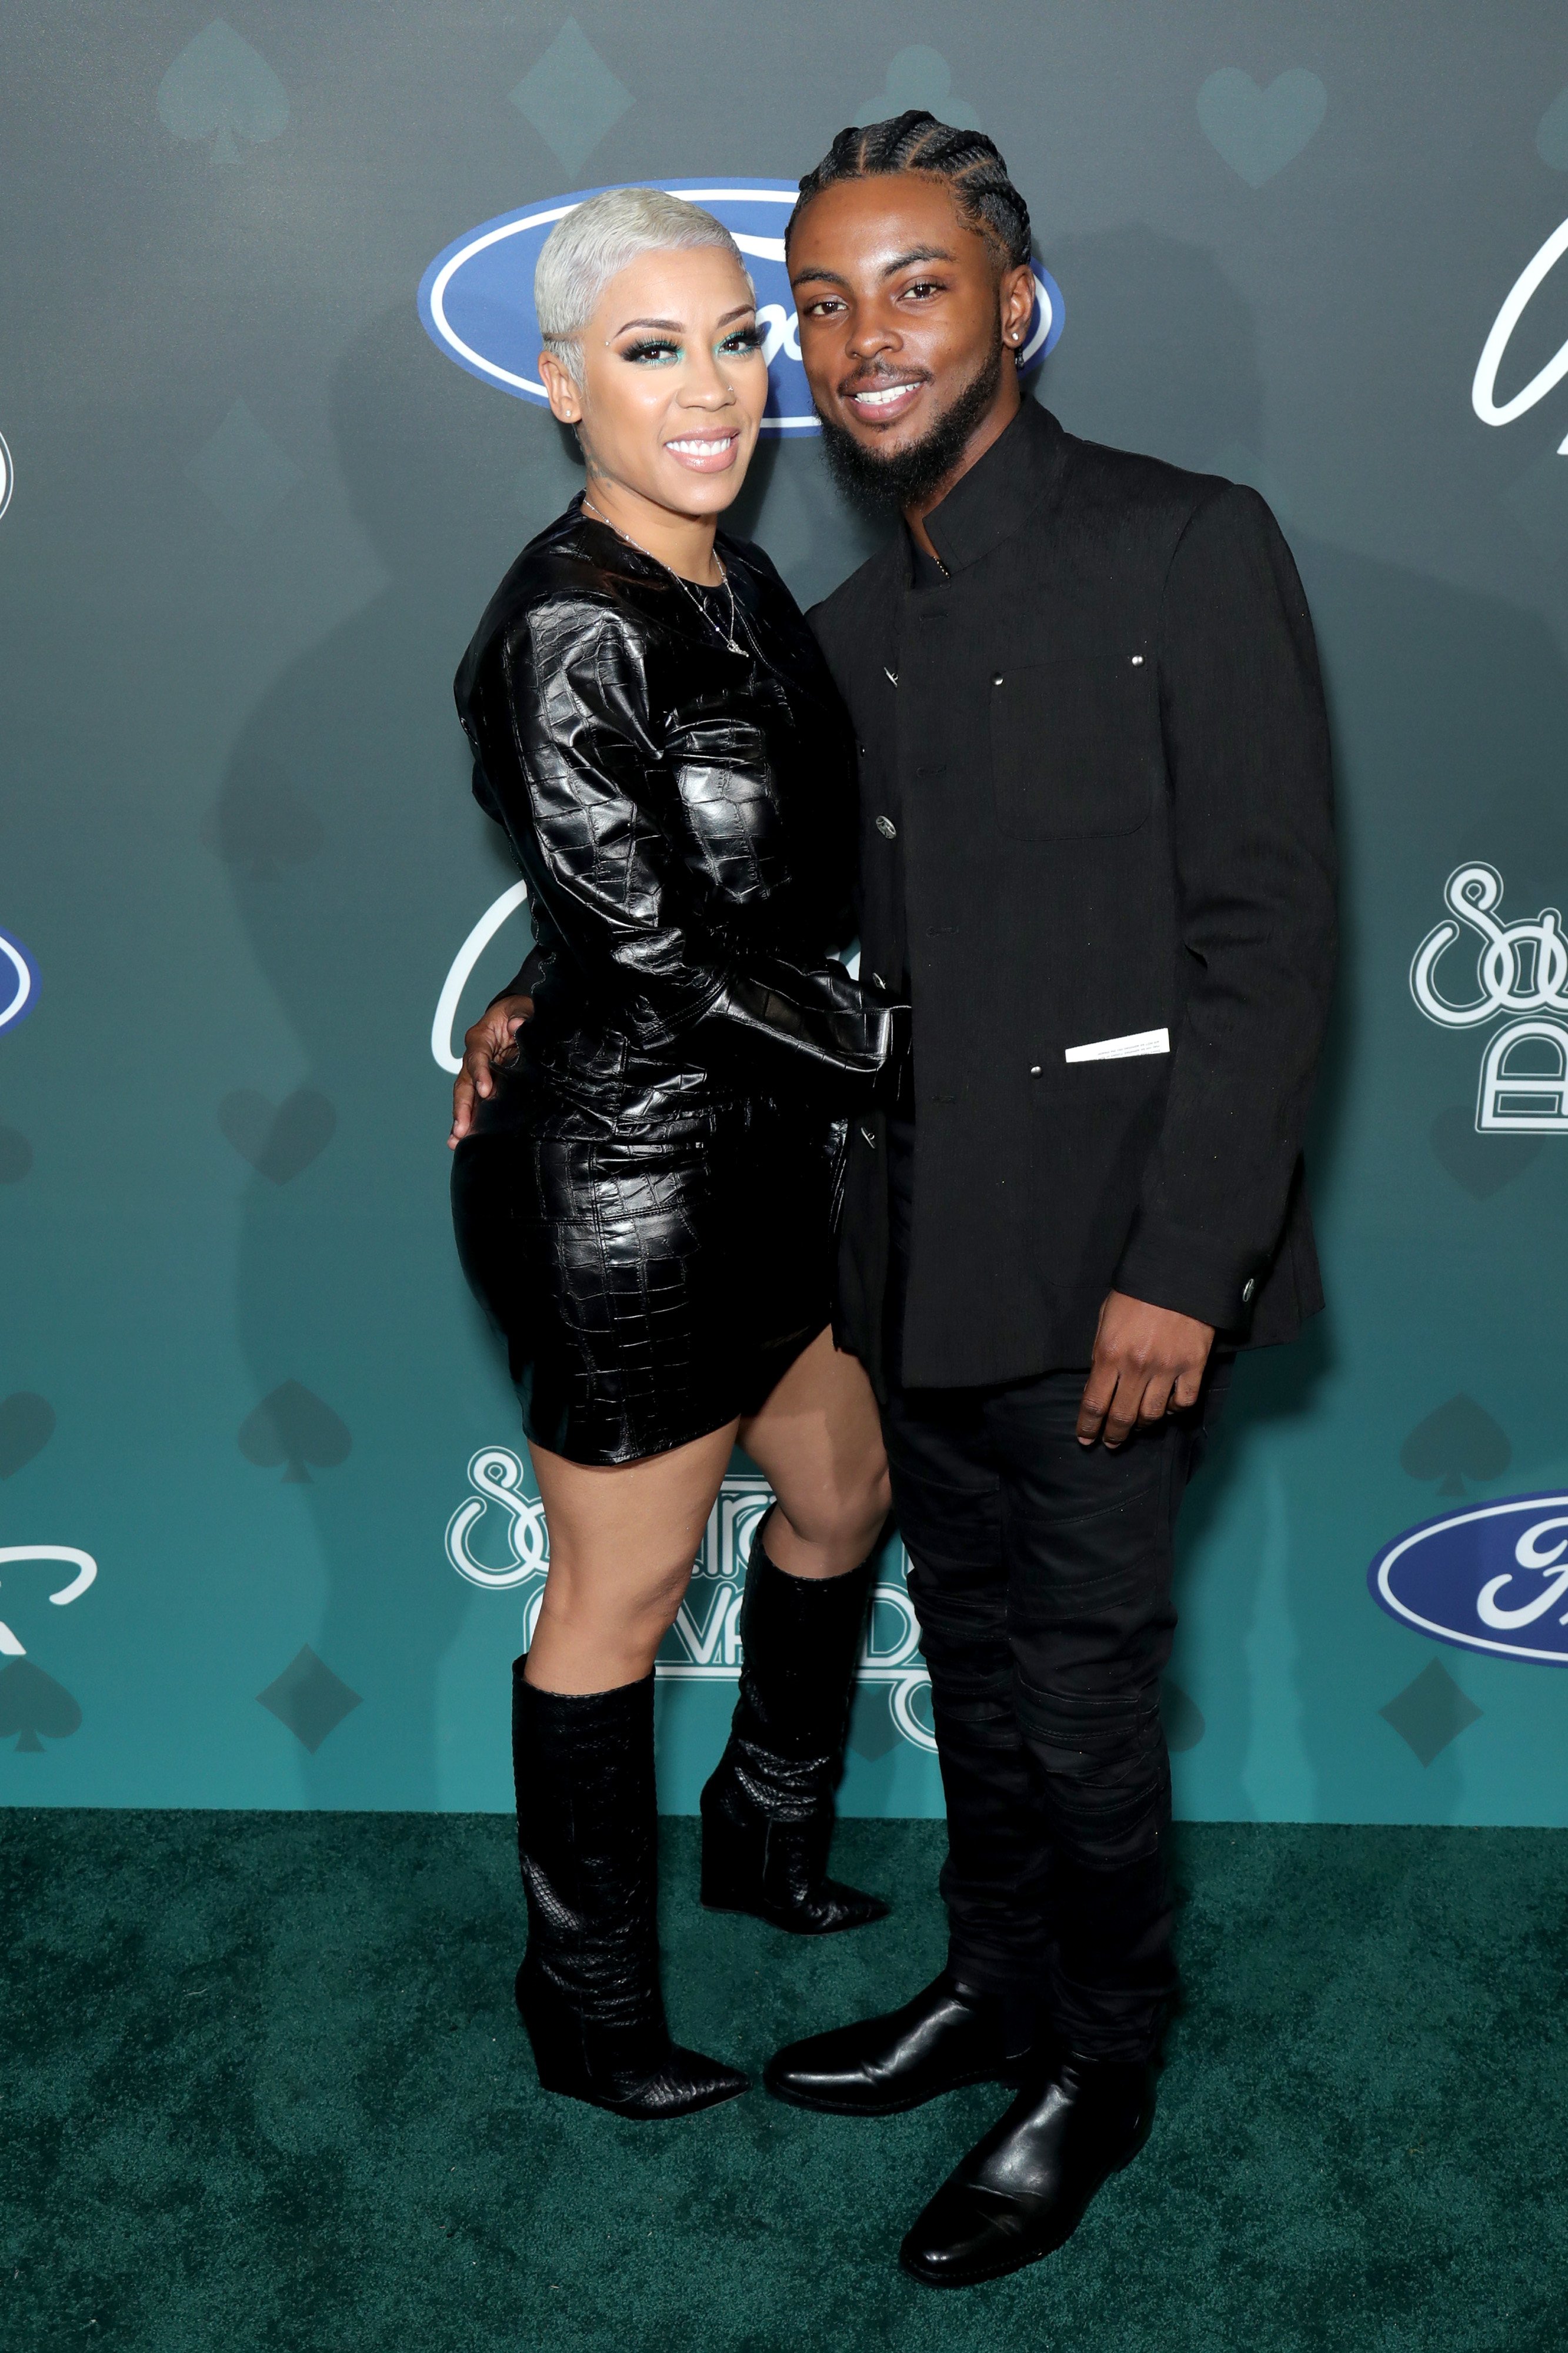 Keyshia Cole and Niko Khale at the 2019 Soul Train Awards on November 17, 2019 | Photo: GettyImages